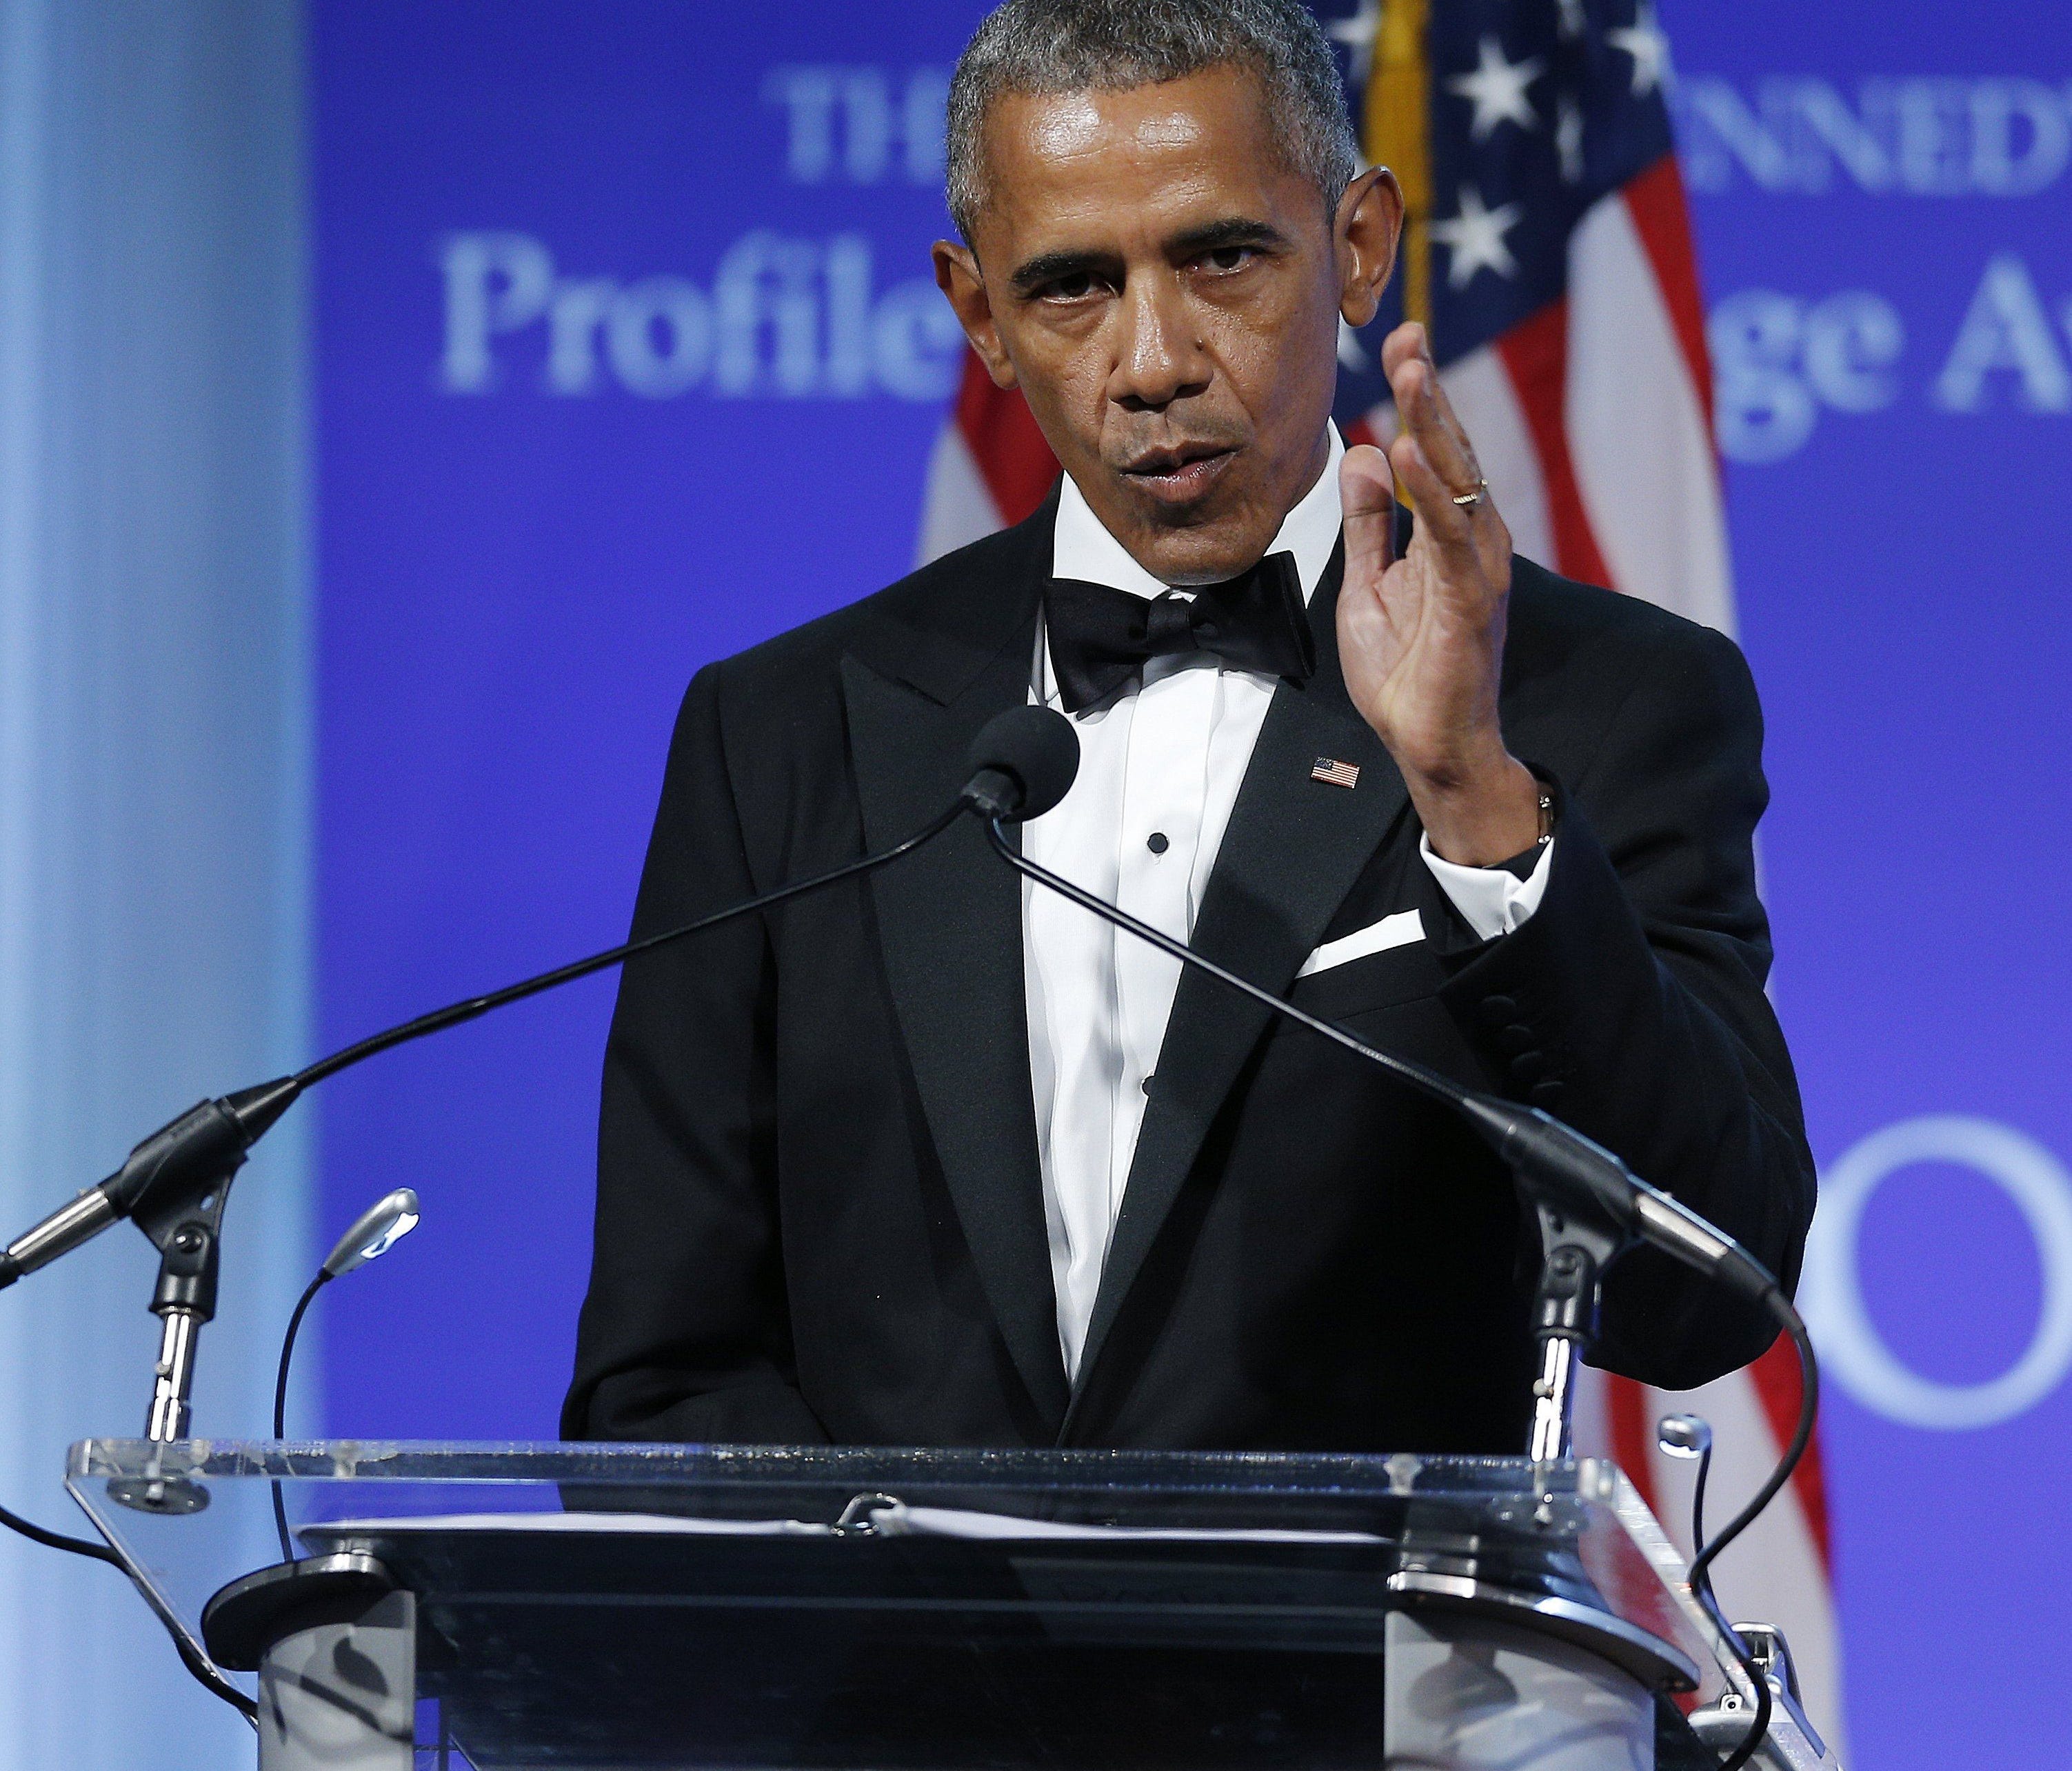 Former US President Barack Obama  speaks after being presented the 2017 John F. Kennedy Profile In Courage Award at the John F. Kennedy Library in Boston, Massachusetts, USA, 07 May 2017. Obama is being honored for 'his enduring commitment to democra